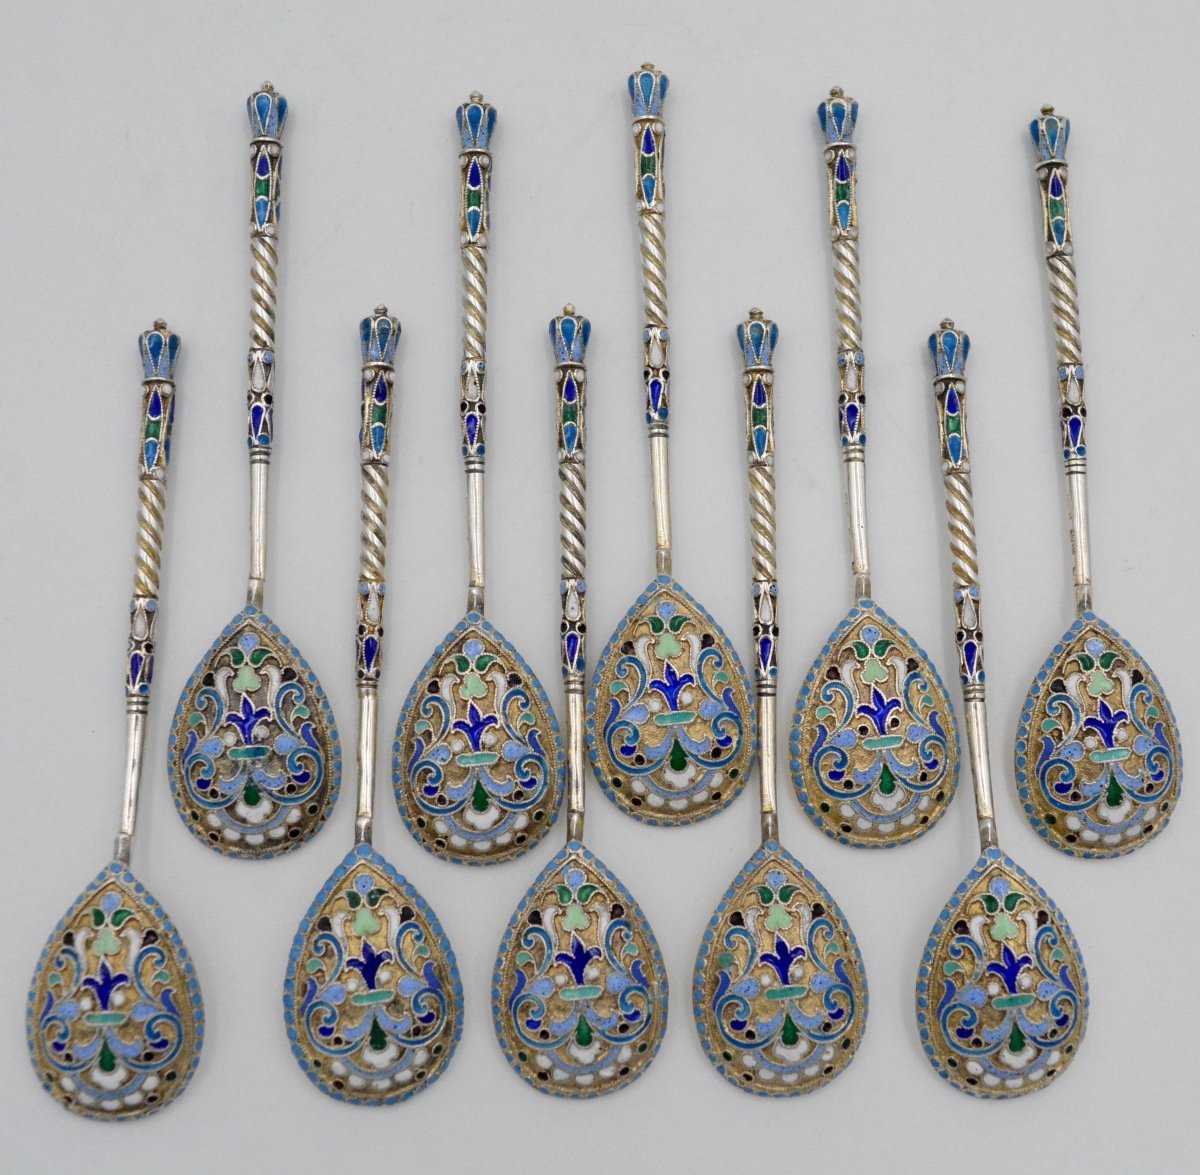 19th Century Russia. Spoons In Silver And Cloisonné Enamels